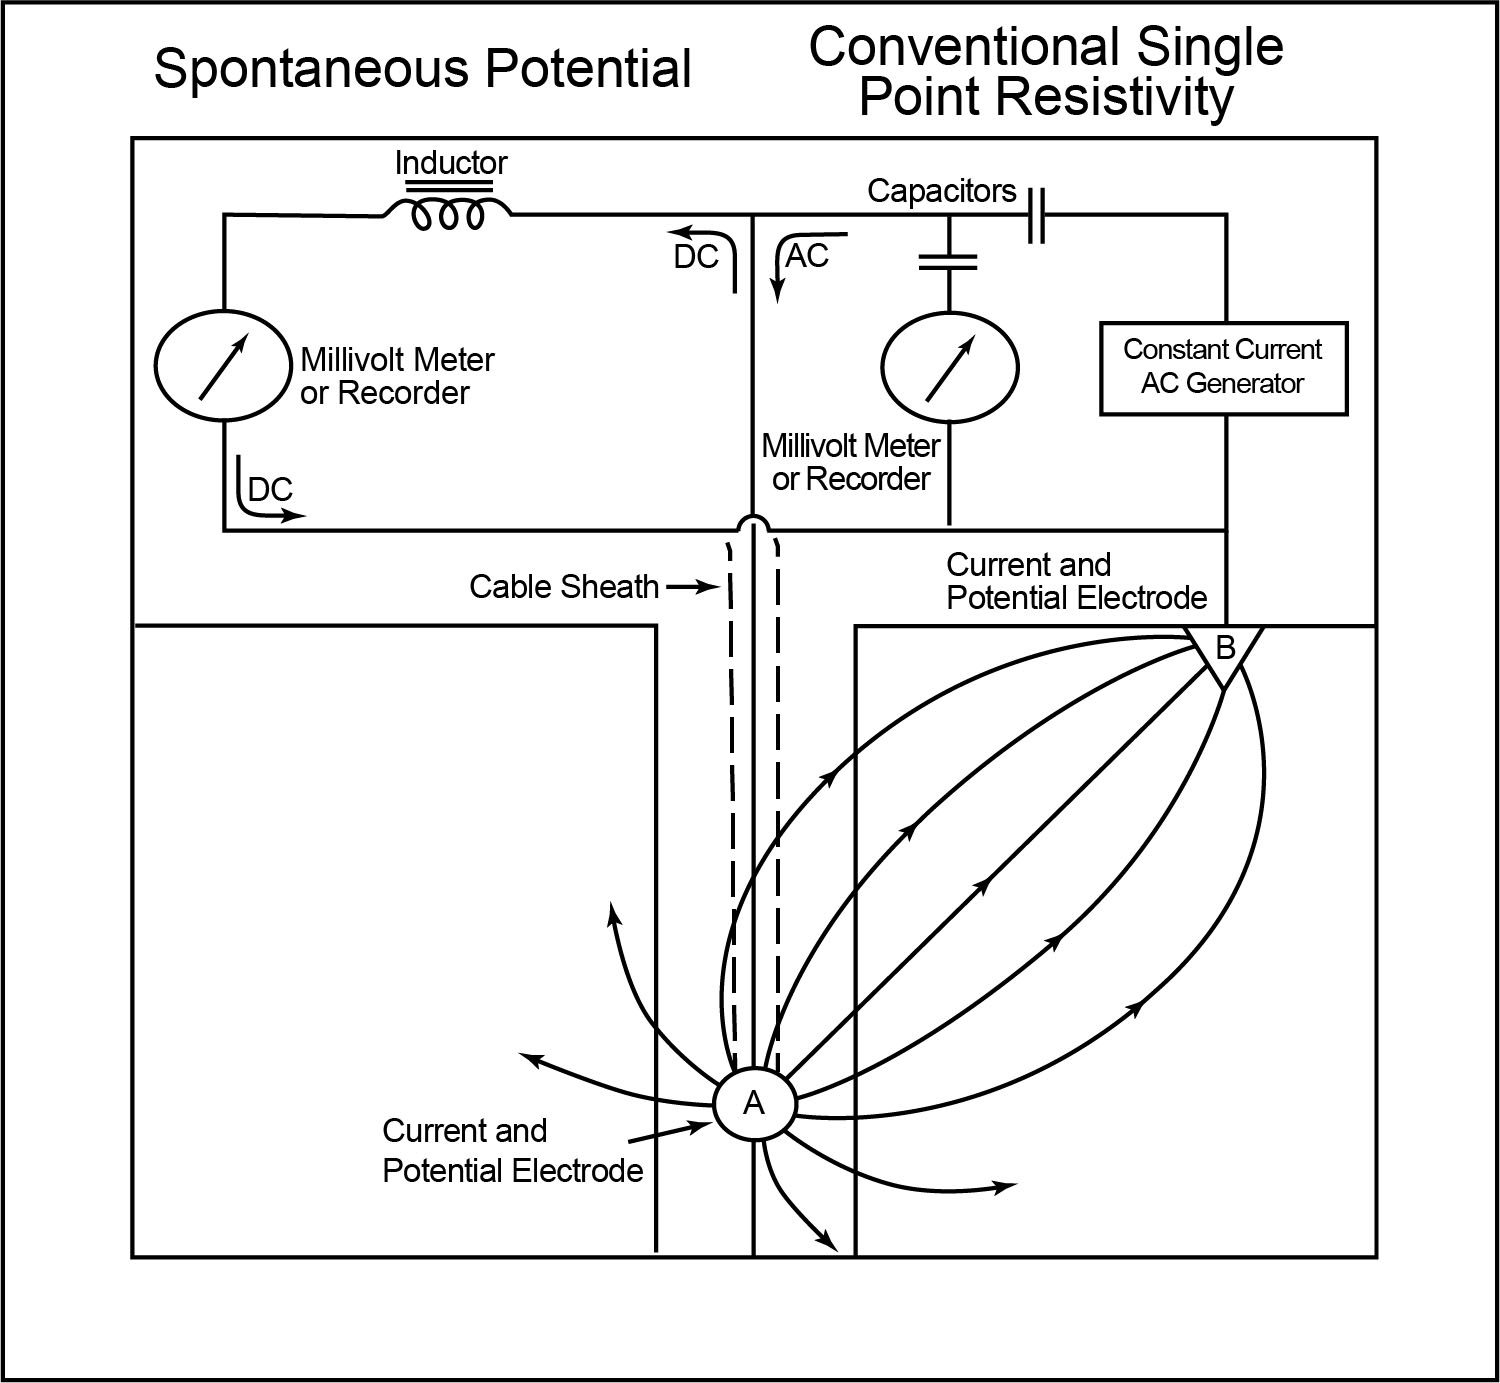 System used to make conventional single-point resistance spontaneous potential logs.